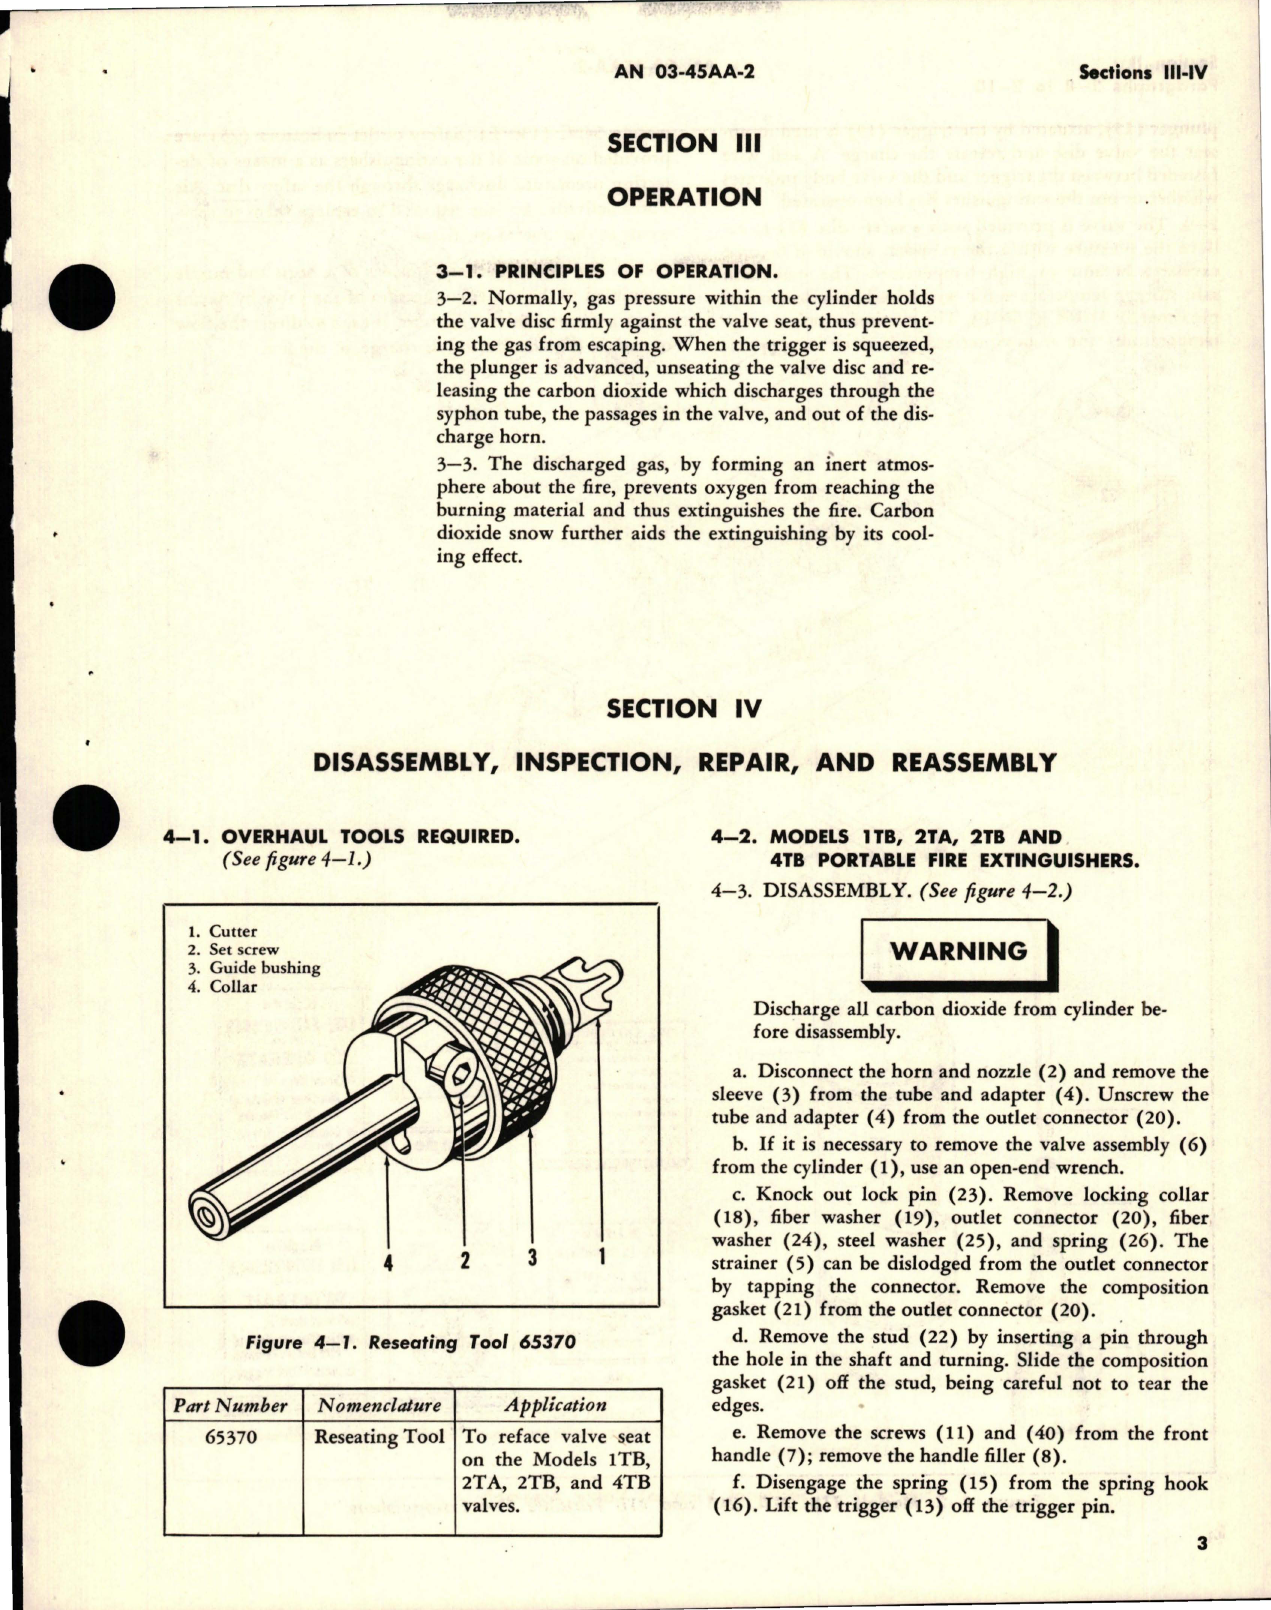 Sample page 7 from AirCorps Library document: Overhaul Instructions for CO2 Portable Fire Extinguishers - Models 1TB, 2TA, 2TB, 4TB, and 5TA